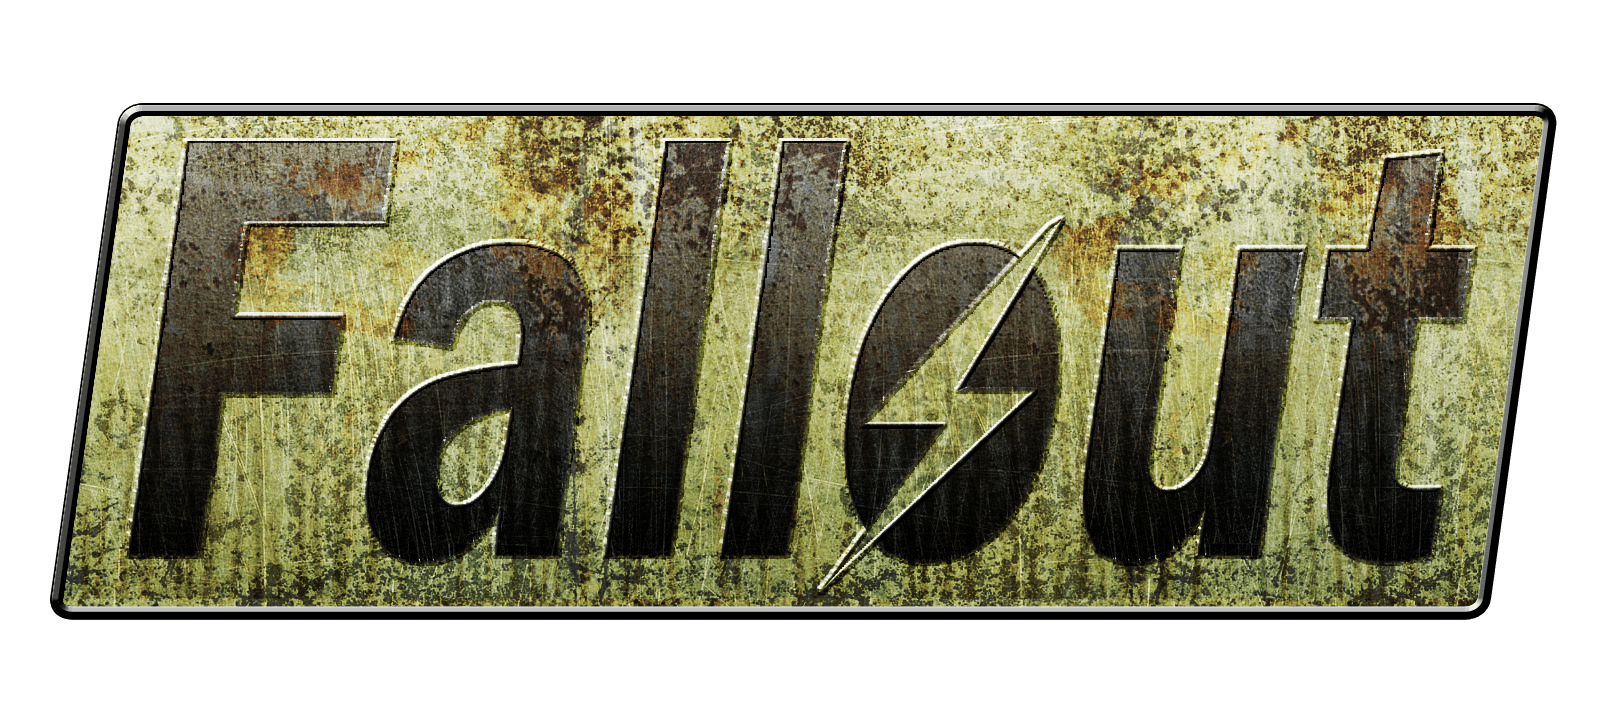 Fallout Logo - Fallout | Crossover Wiki | FANDOM powered by Wikia